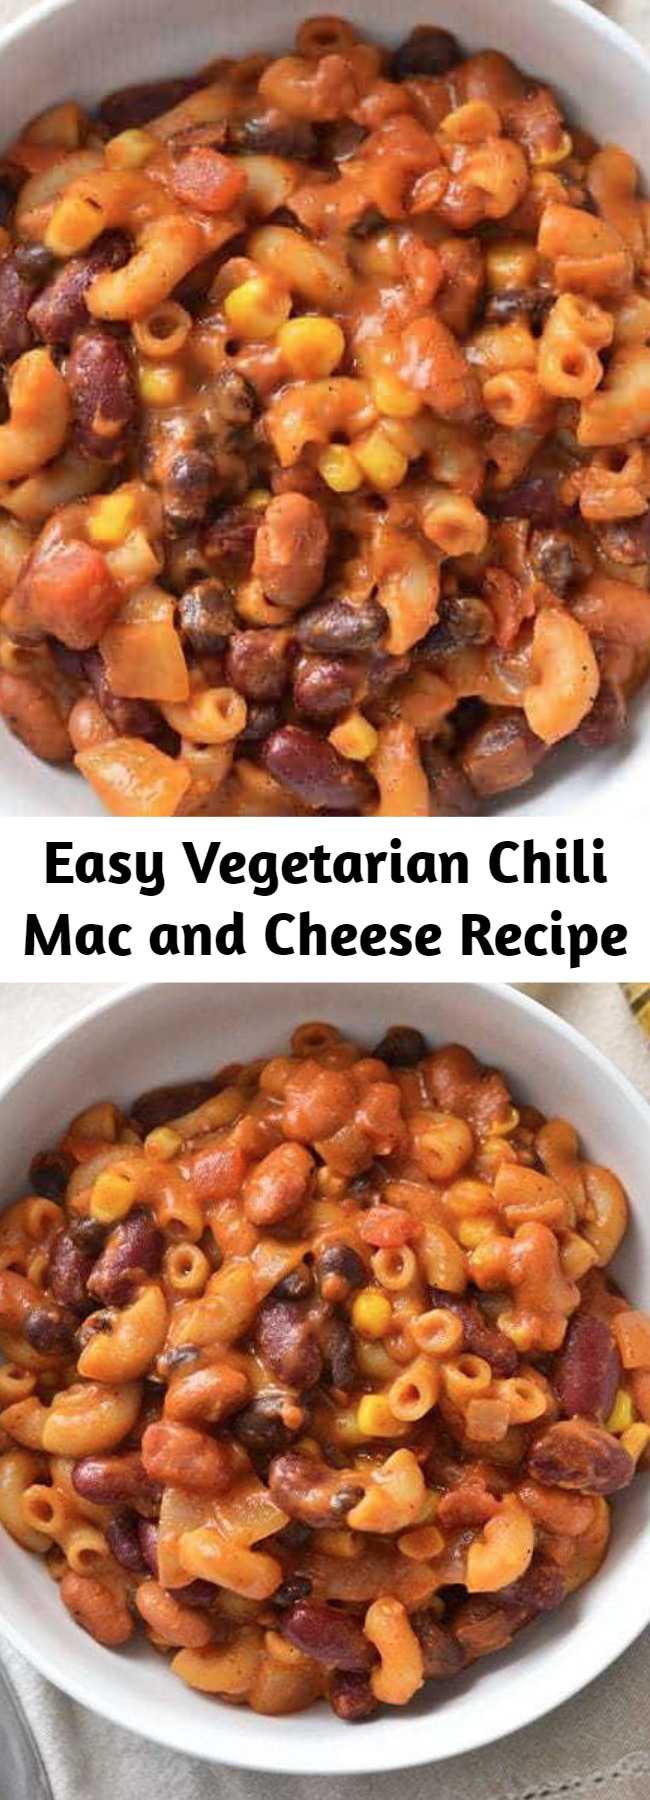 Easy Vegetarian Chili Mac and Cheese Recipe - This rich and comforting One Pot Vegetarian Chili Mac and Cheese is the perfect quick and easy weeknight meal. Works great for meal prep!